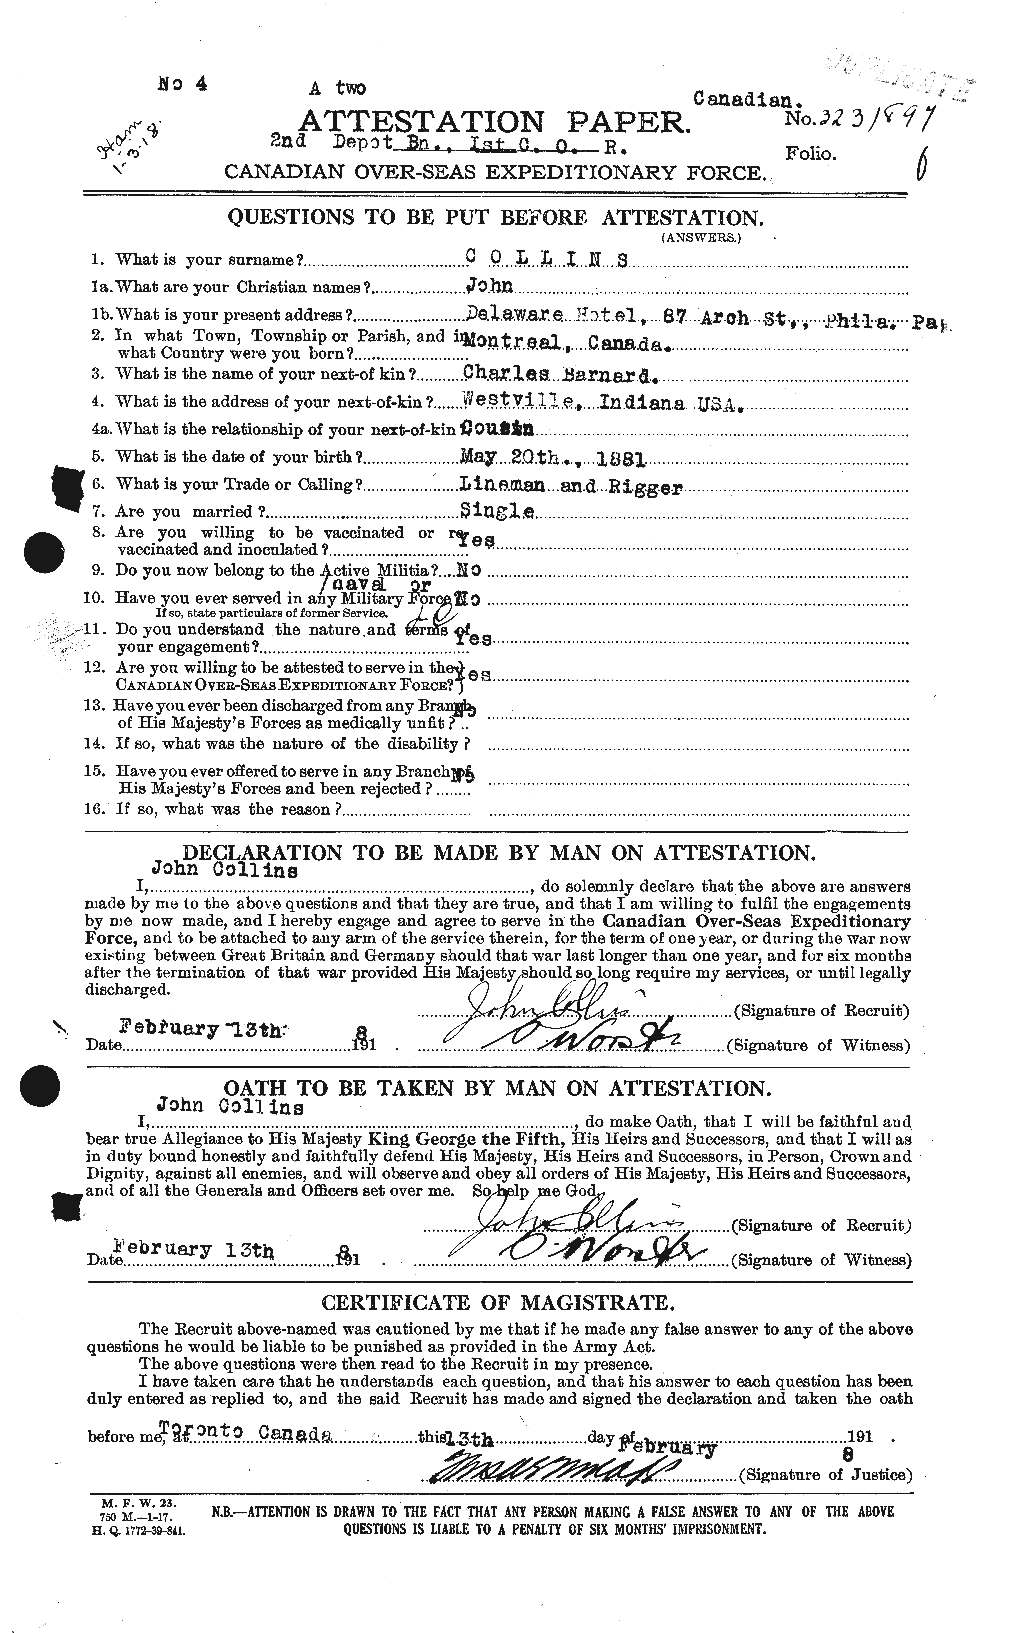 Personnel Records of the First World War - CEF 069811a